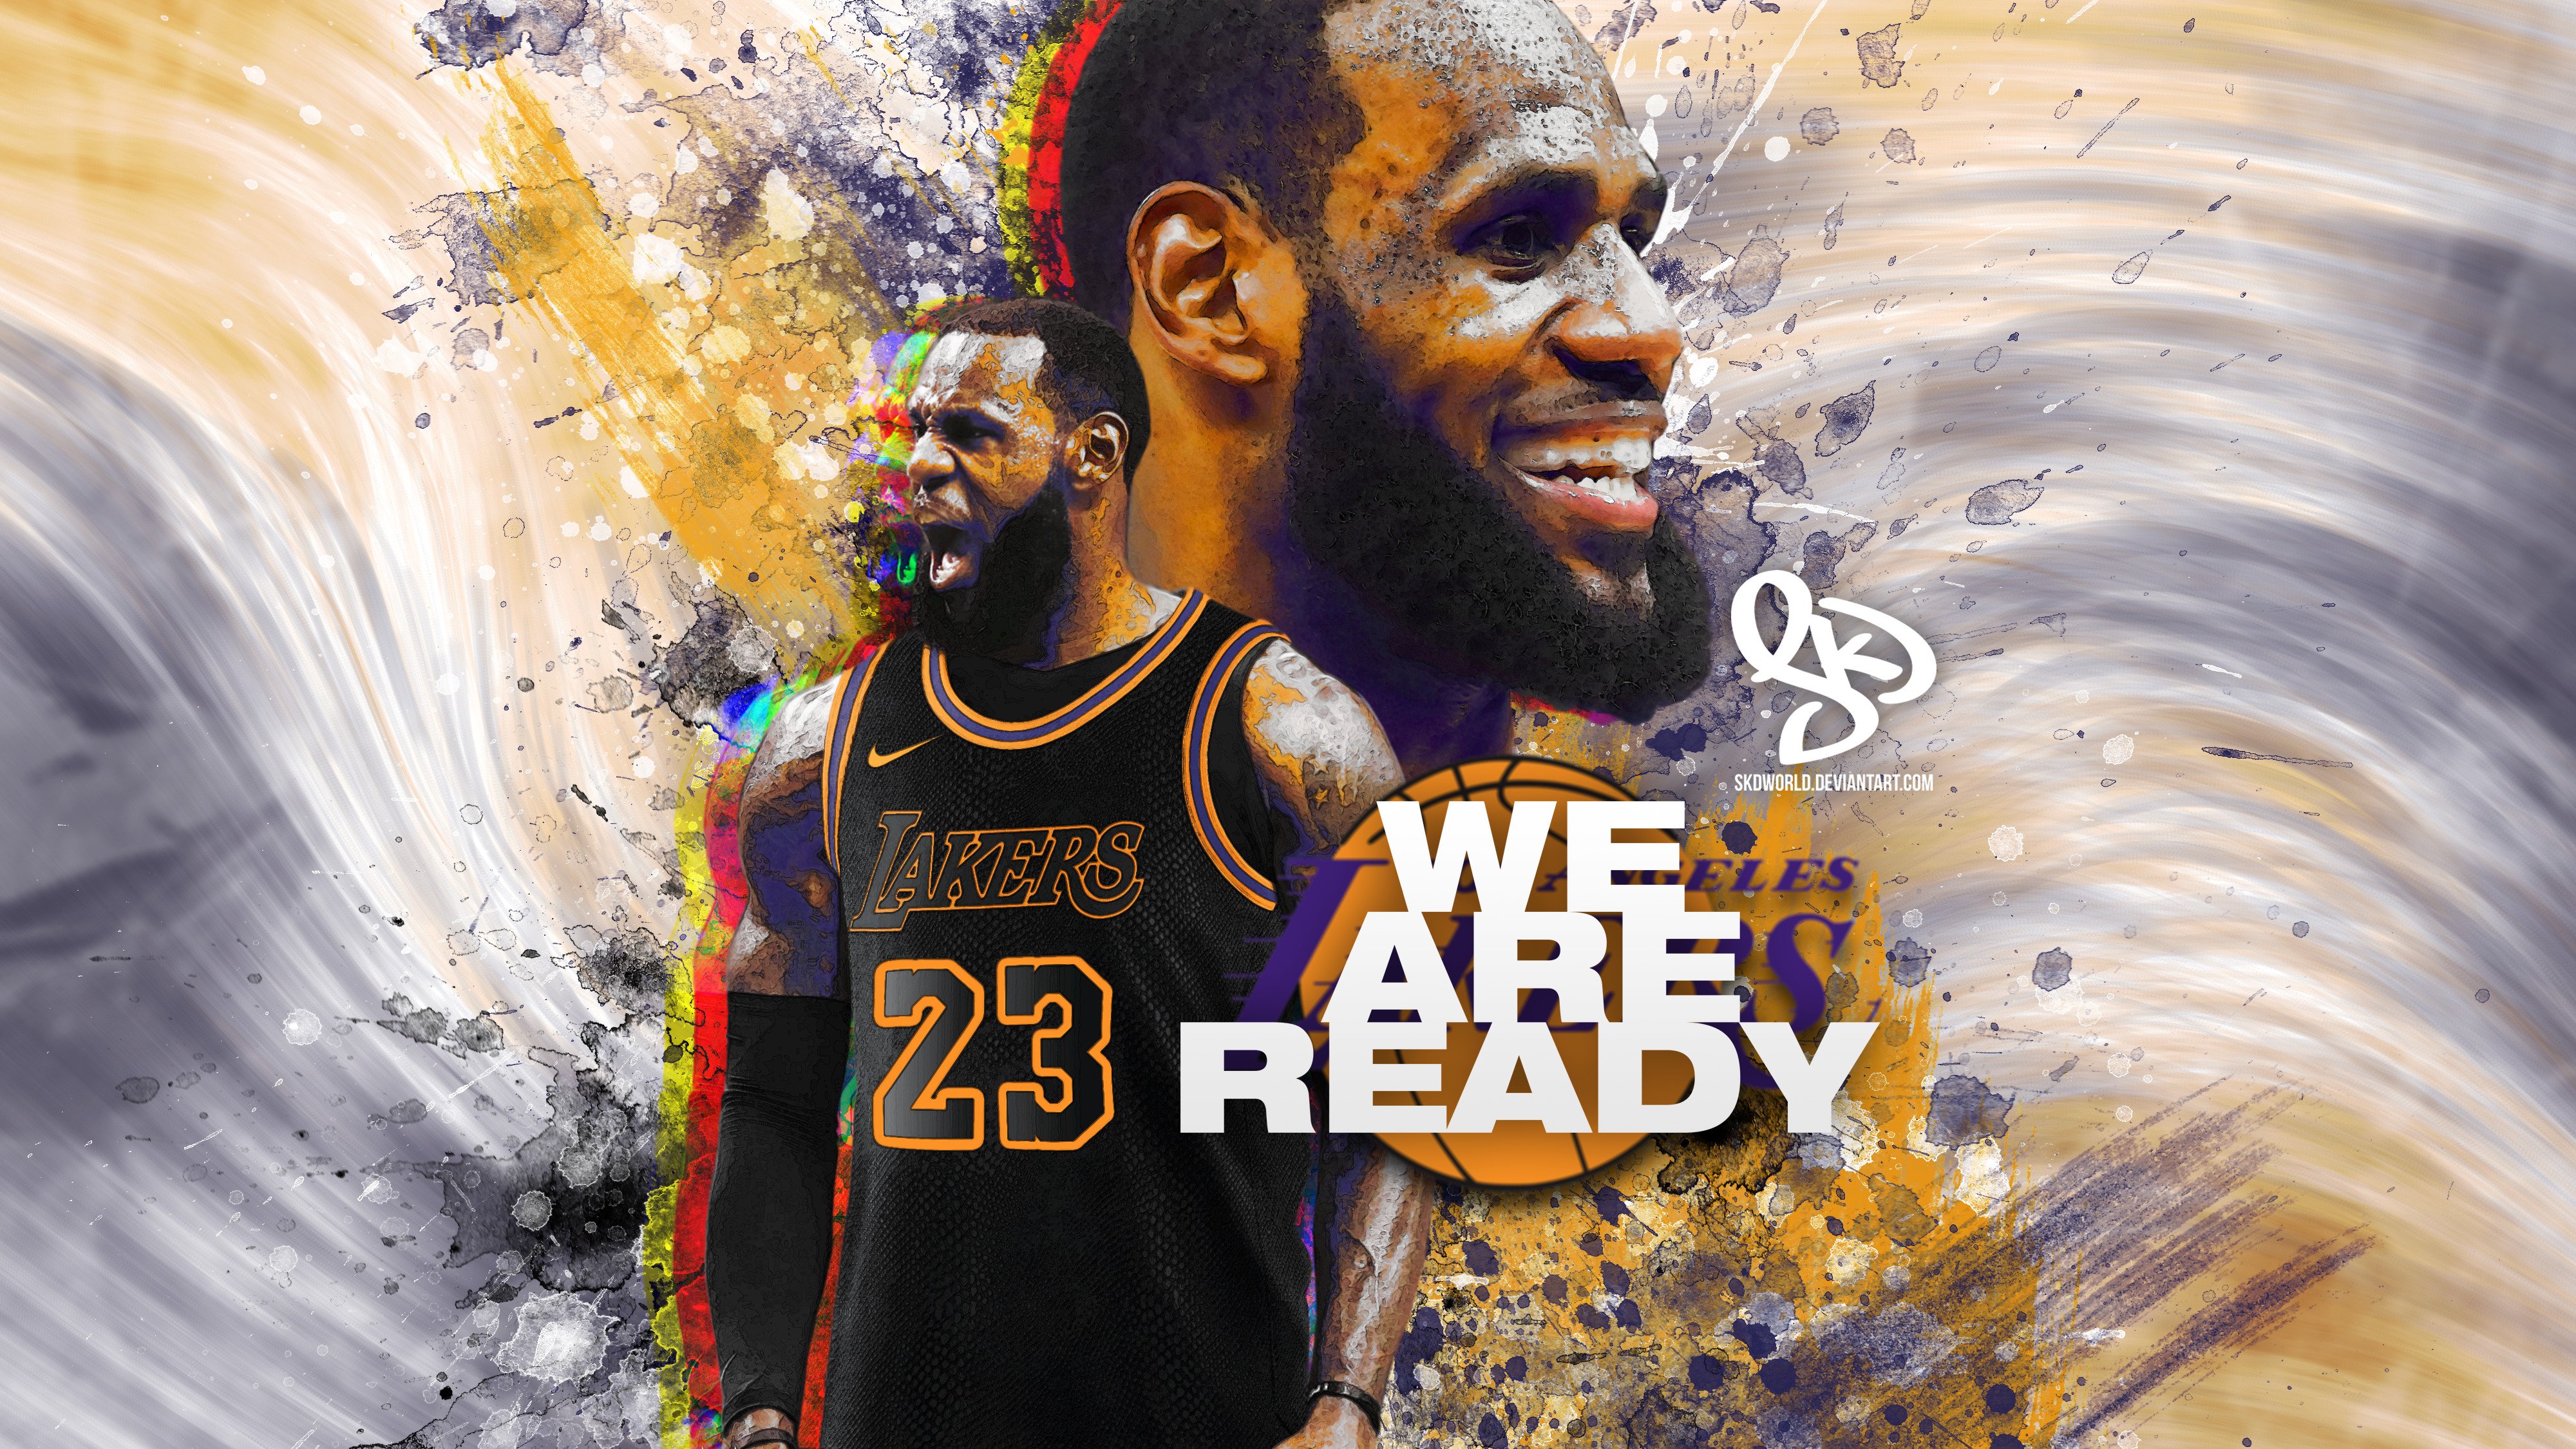 Lebron Lakers Wallpaper L A Is Ready And